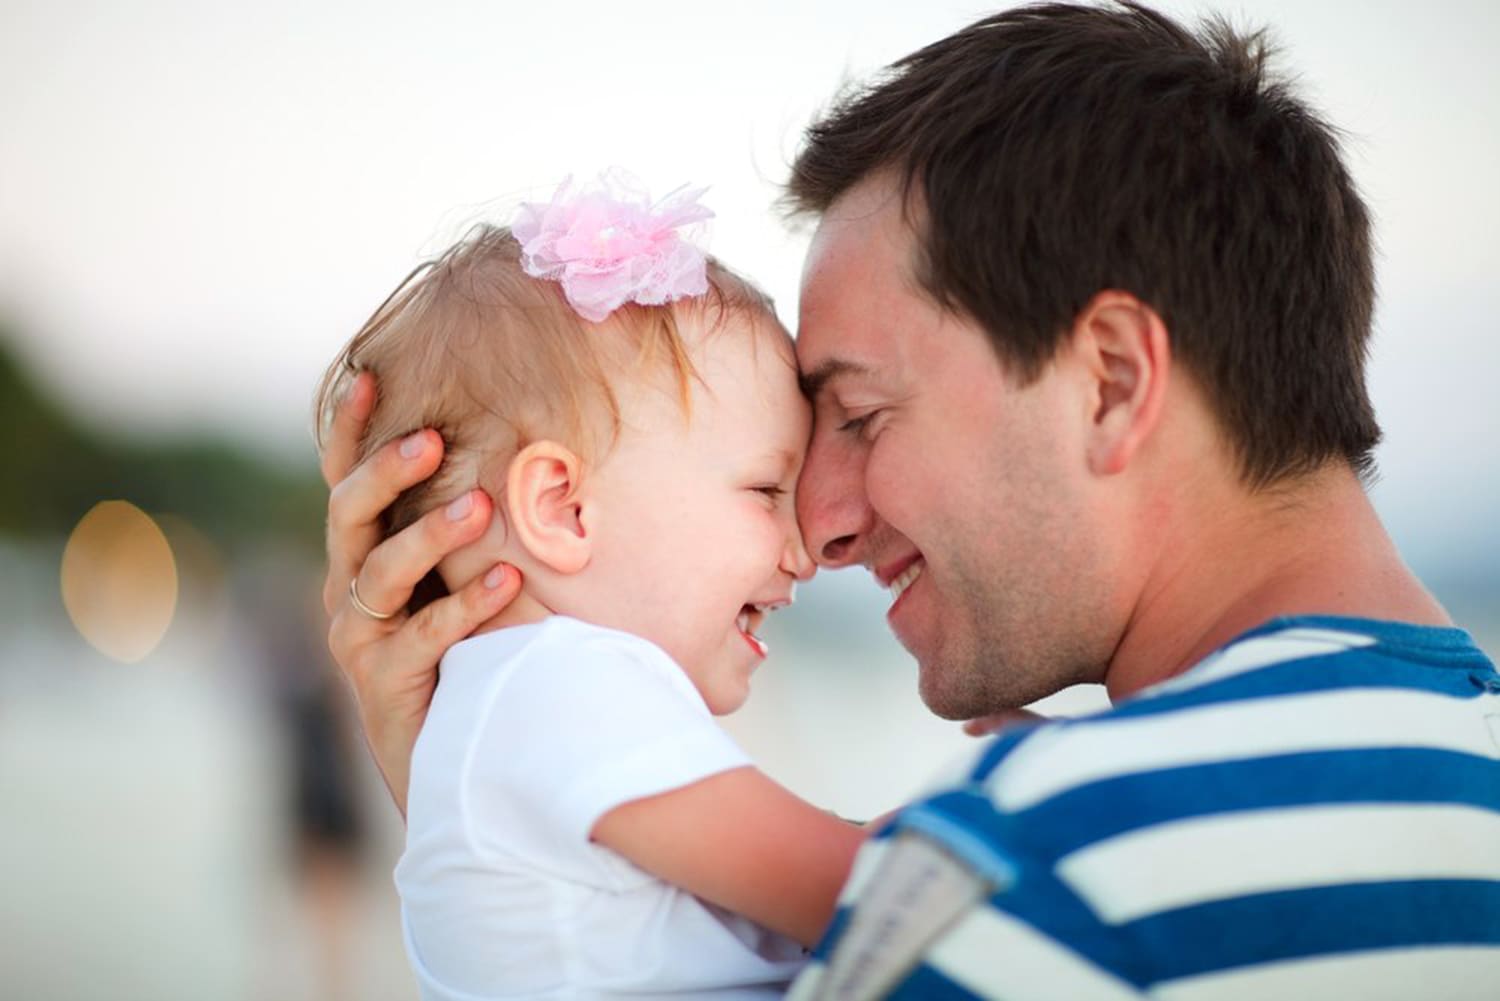 Emotional Attunement - The secret to raising healthy, happy families